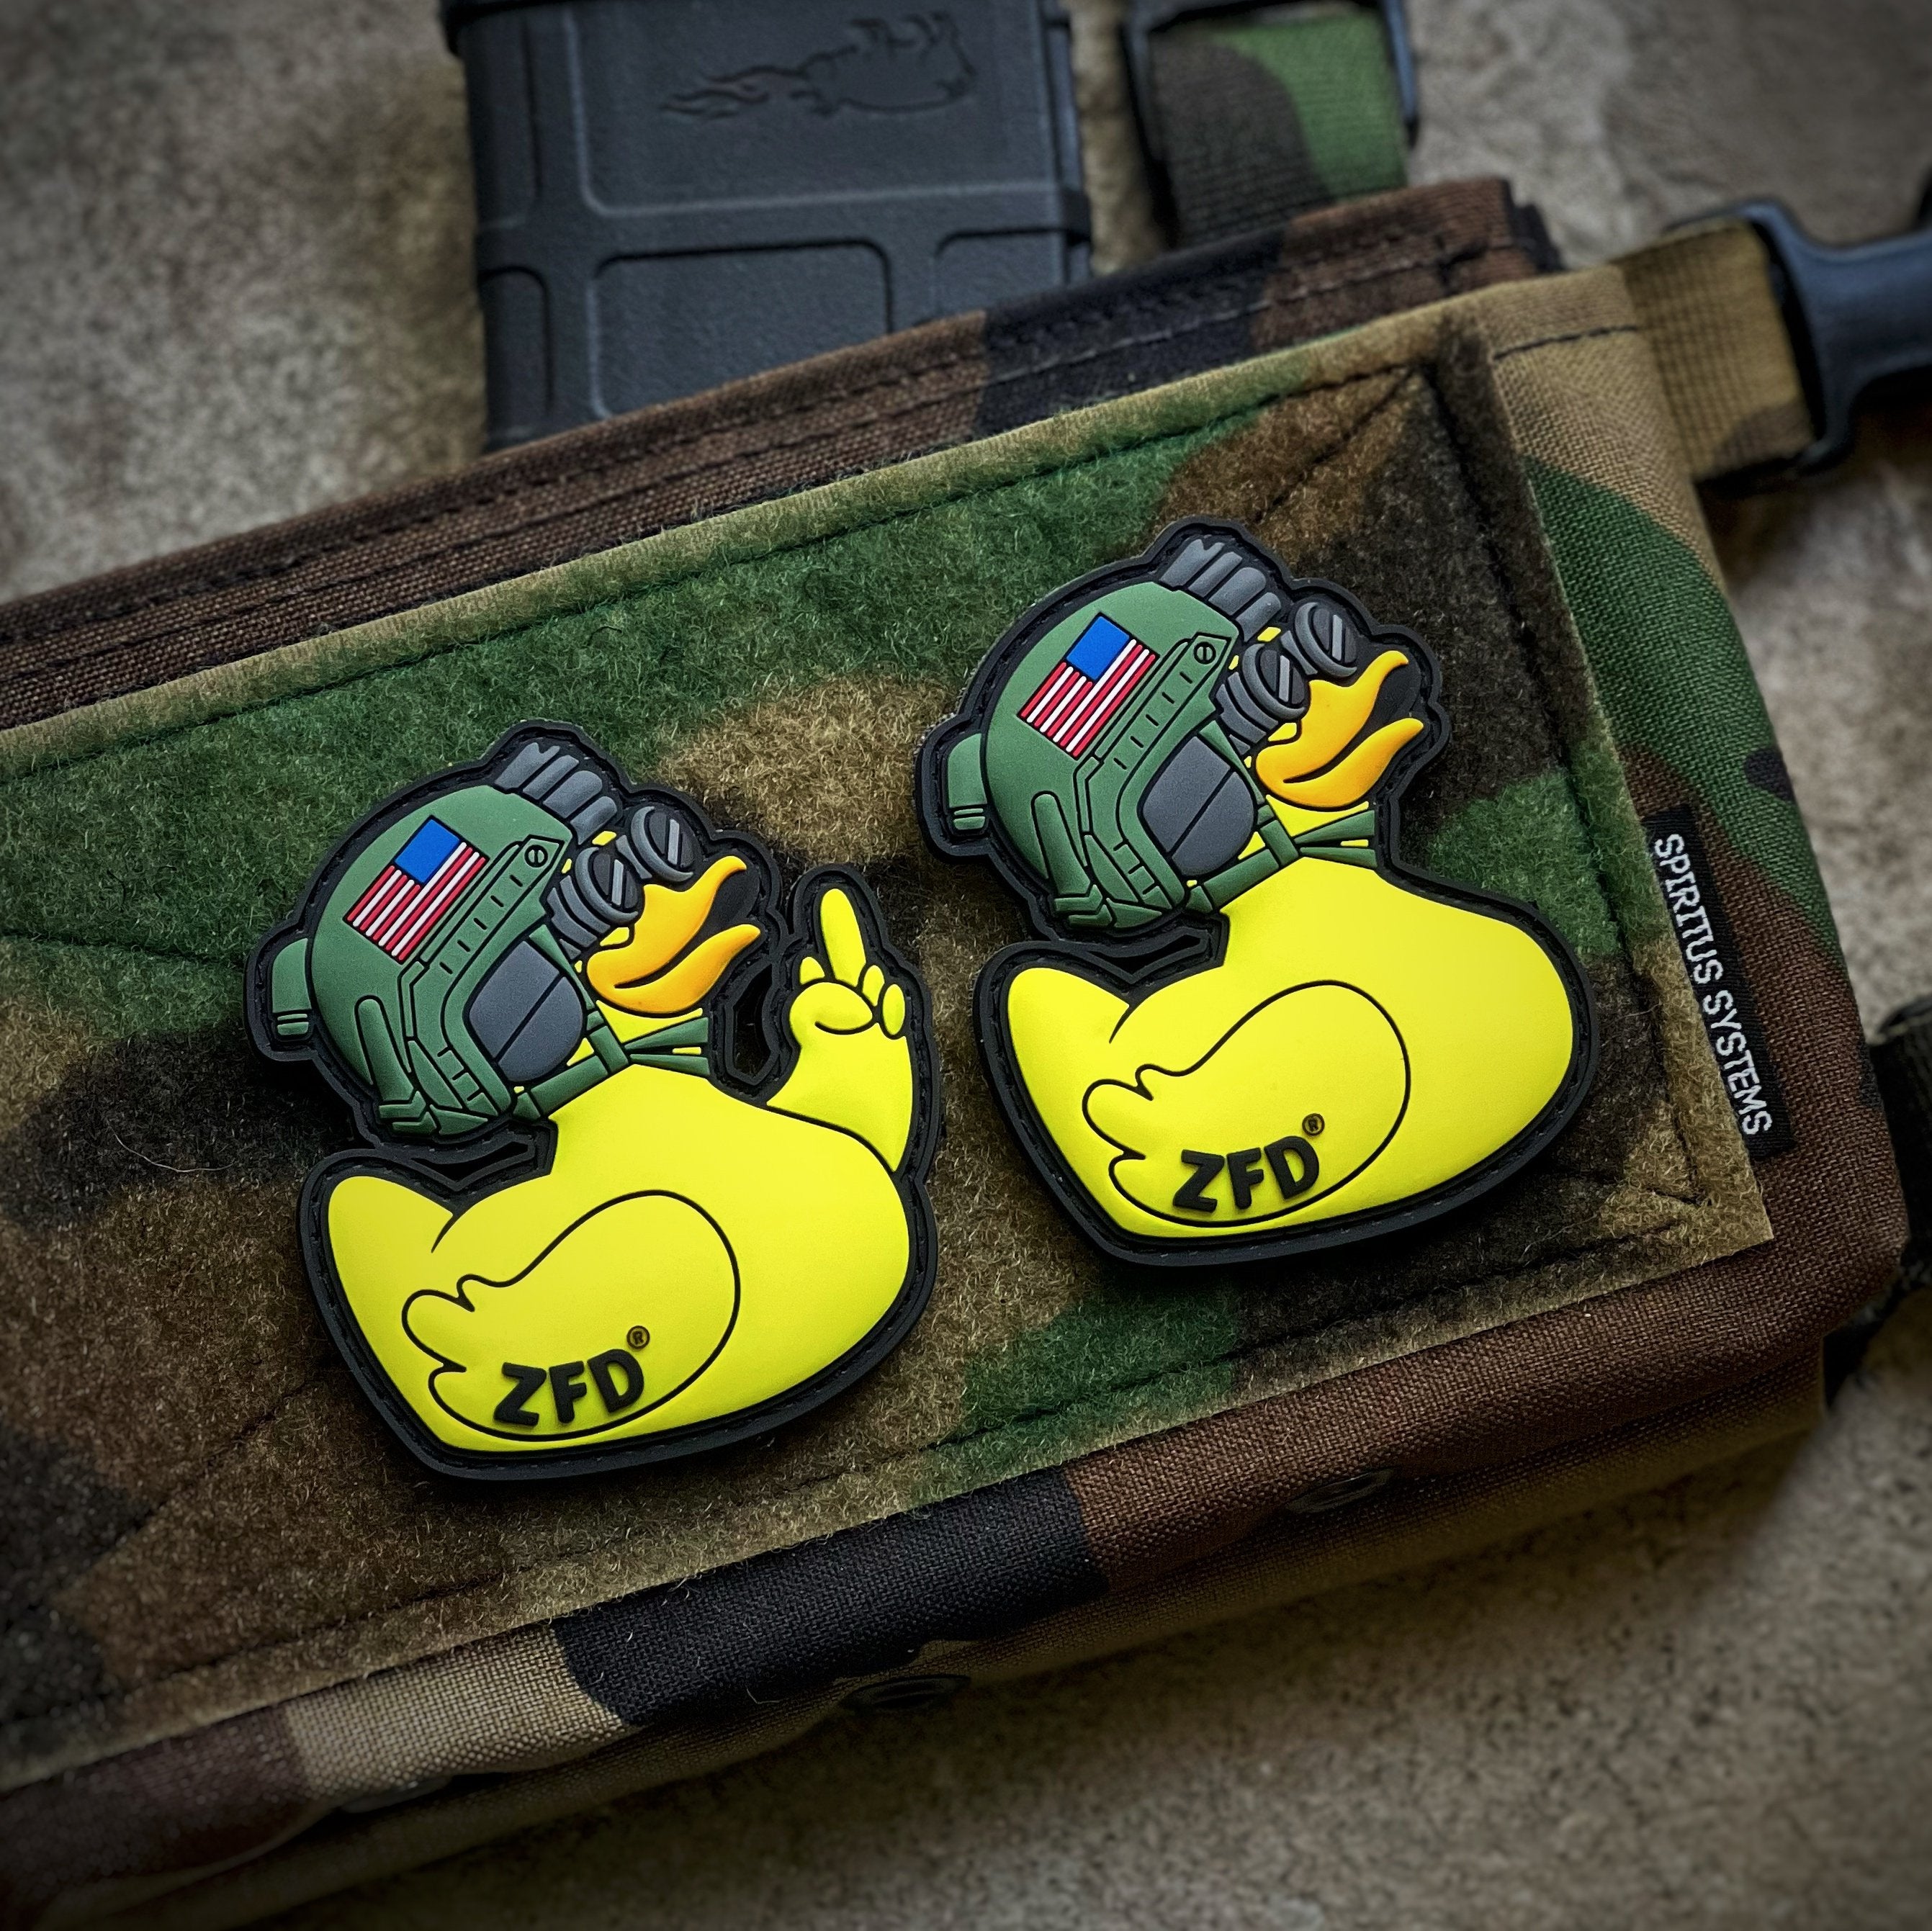 Yellow Tactical Rubber Duck PVC Patches with Olive Green Helmets and Night Vision Goggles